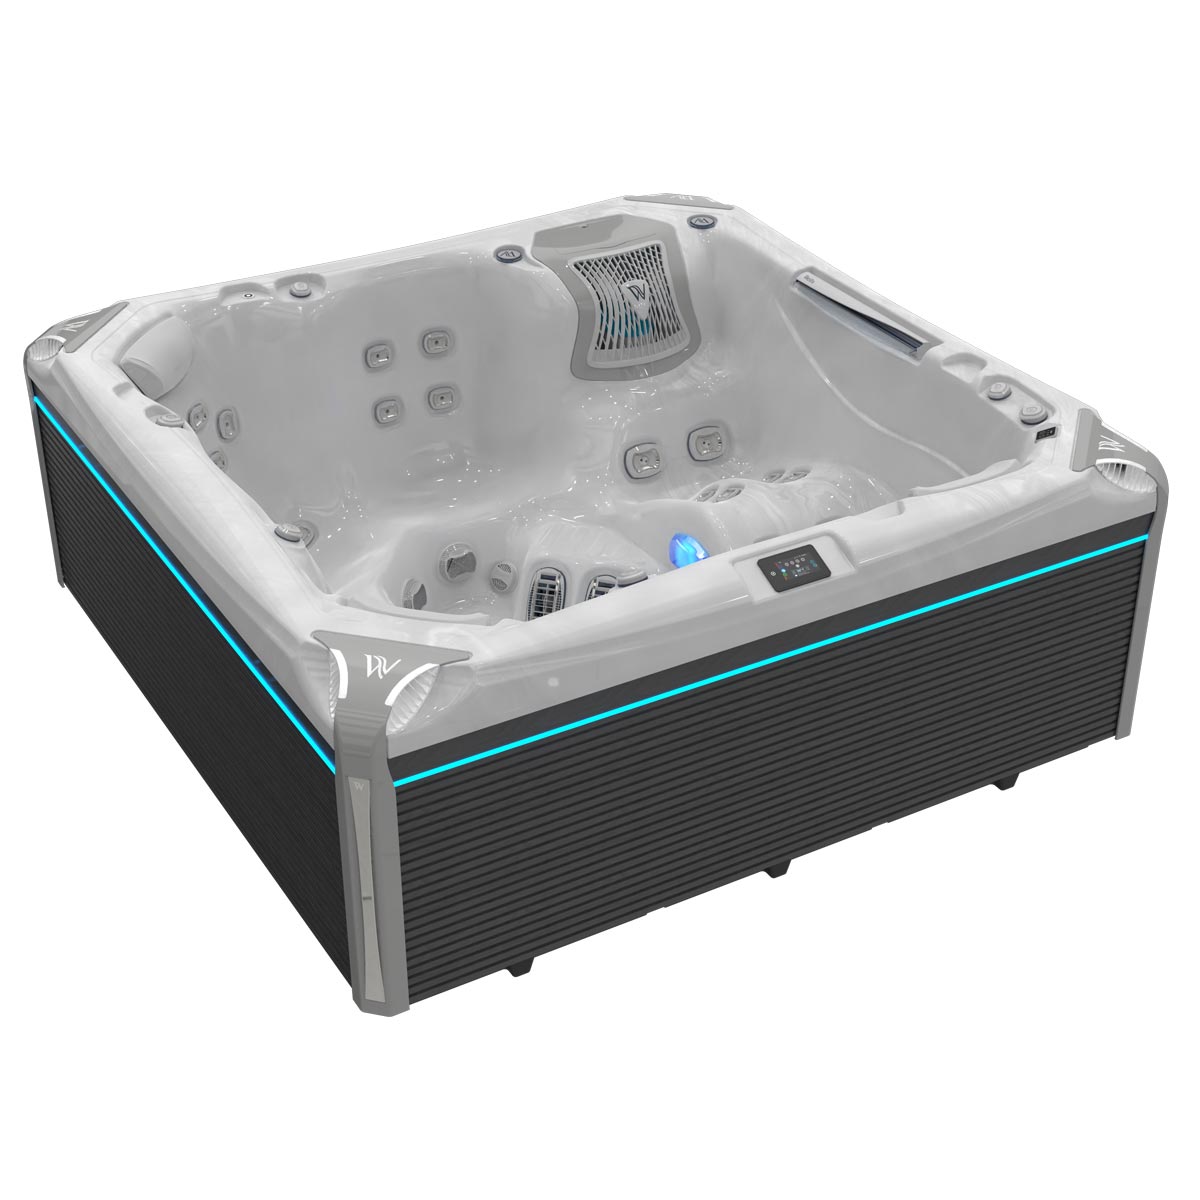 Kilimanjaro Life hottub sterling deluxe edition